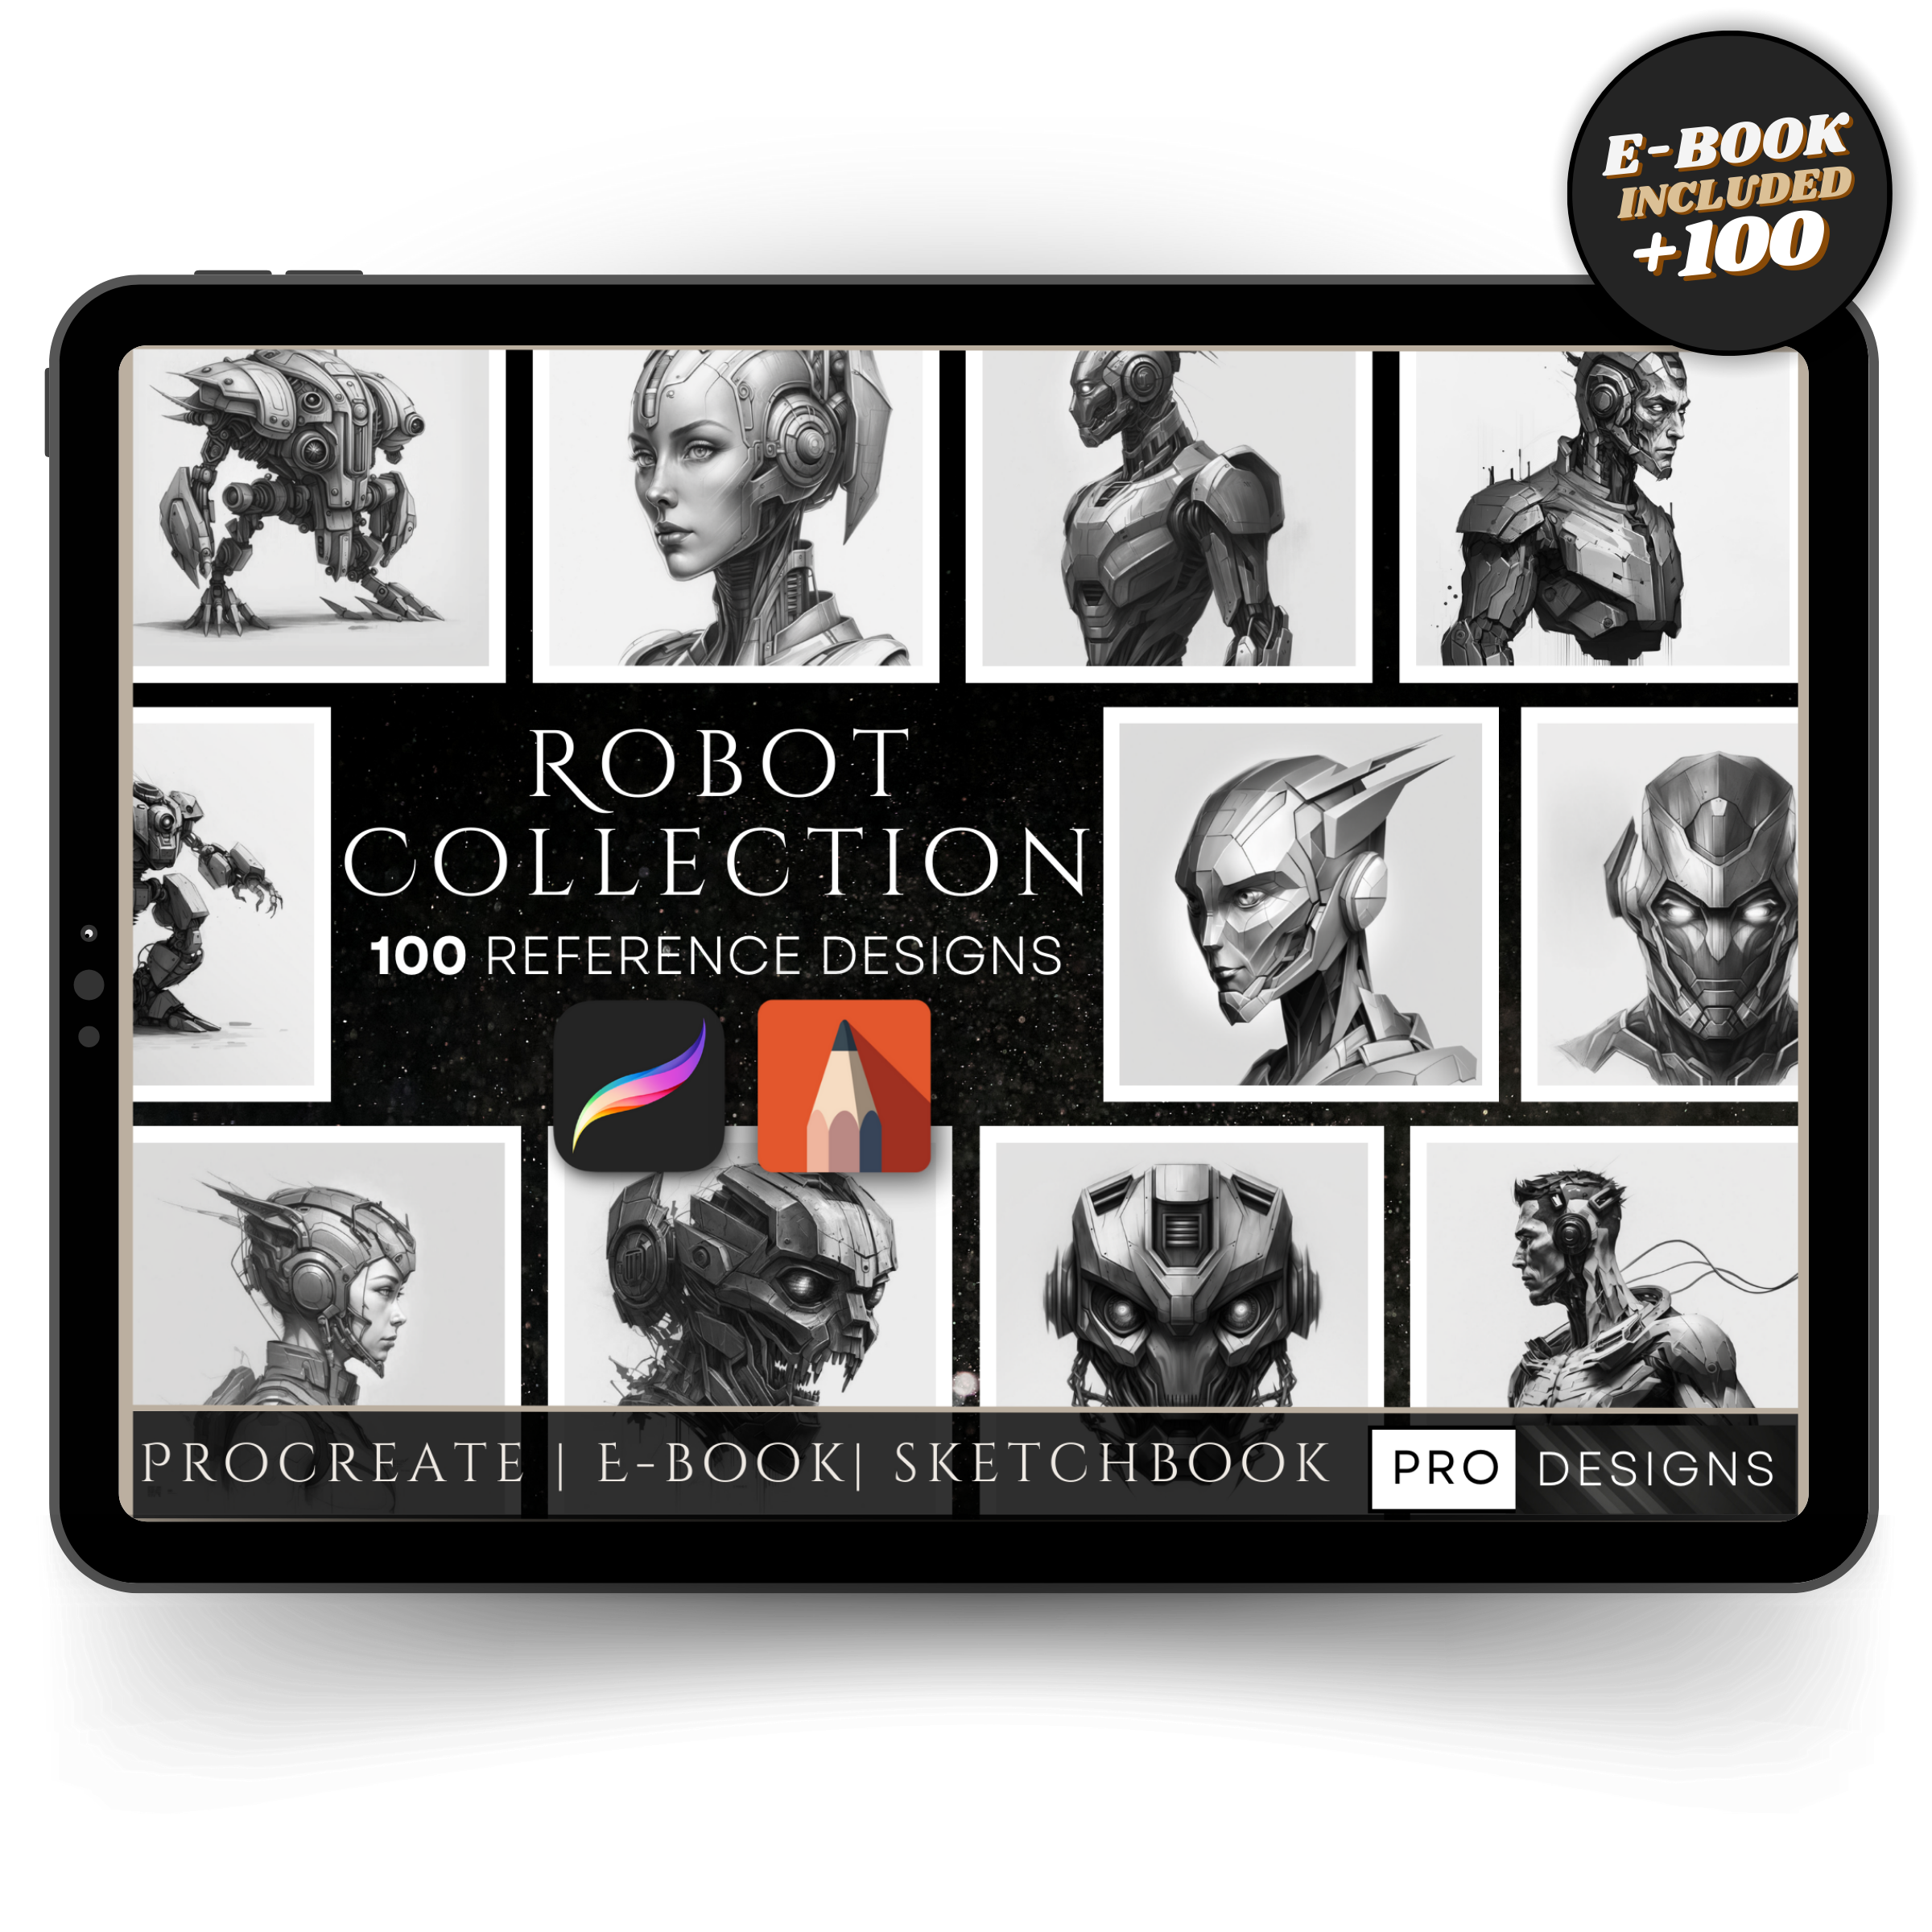 "Mechanical Wonders" - The Robots Collection